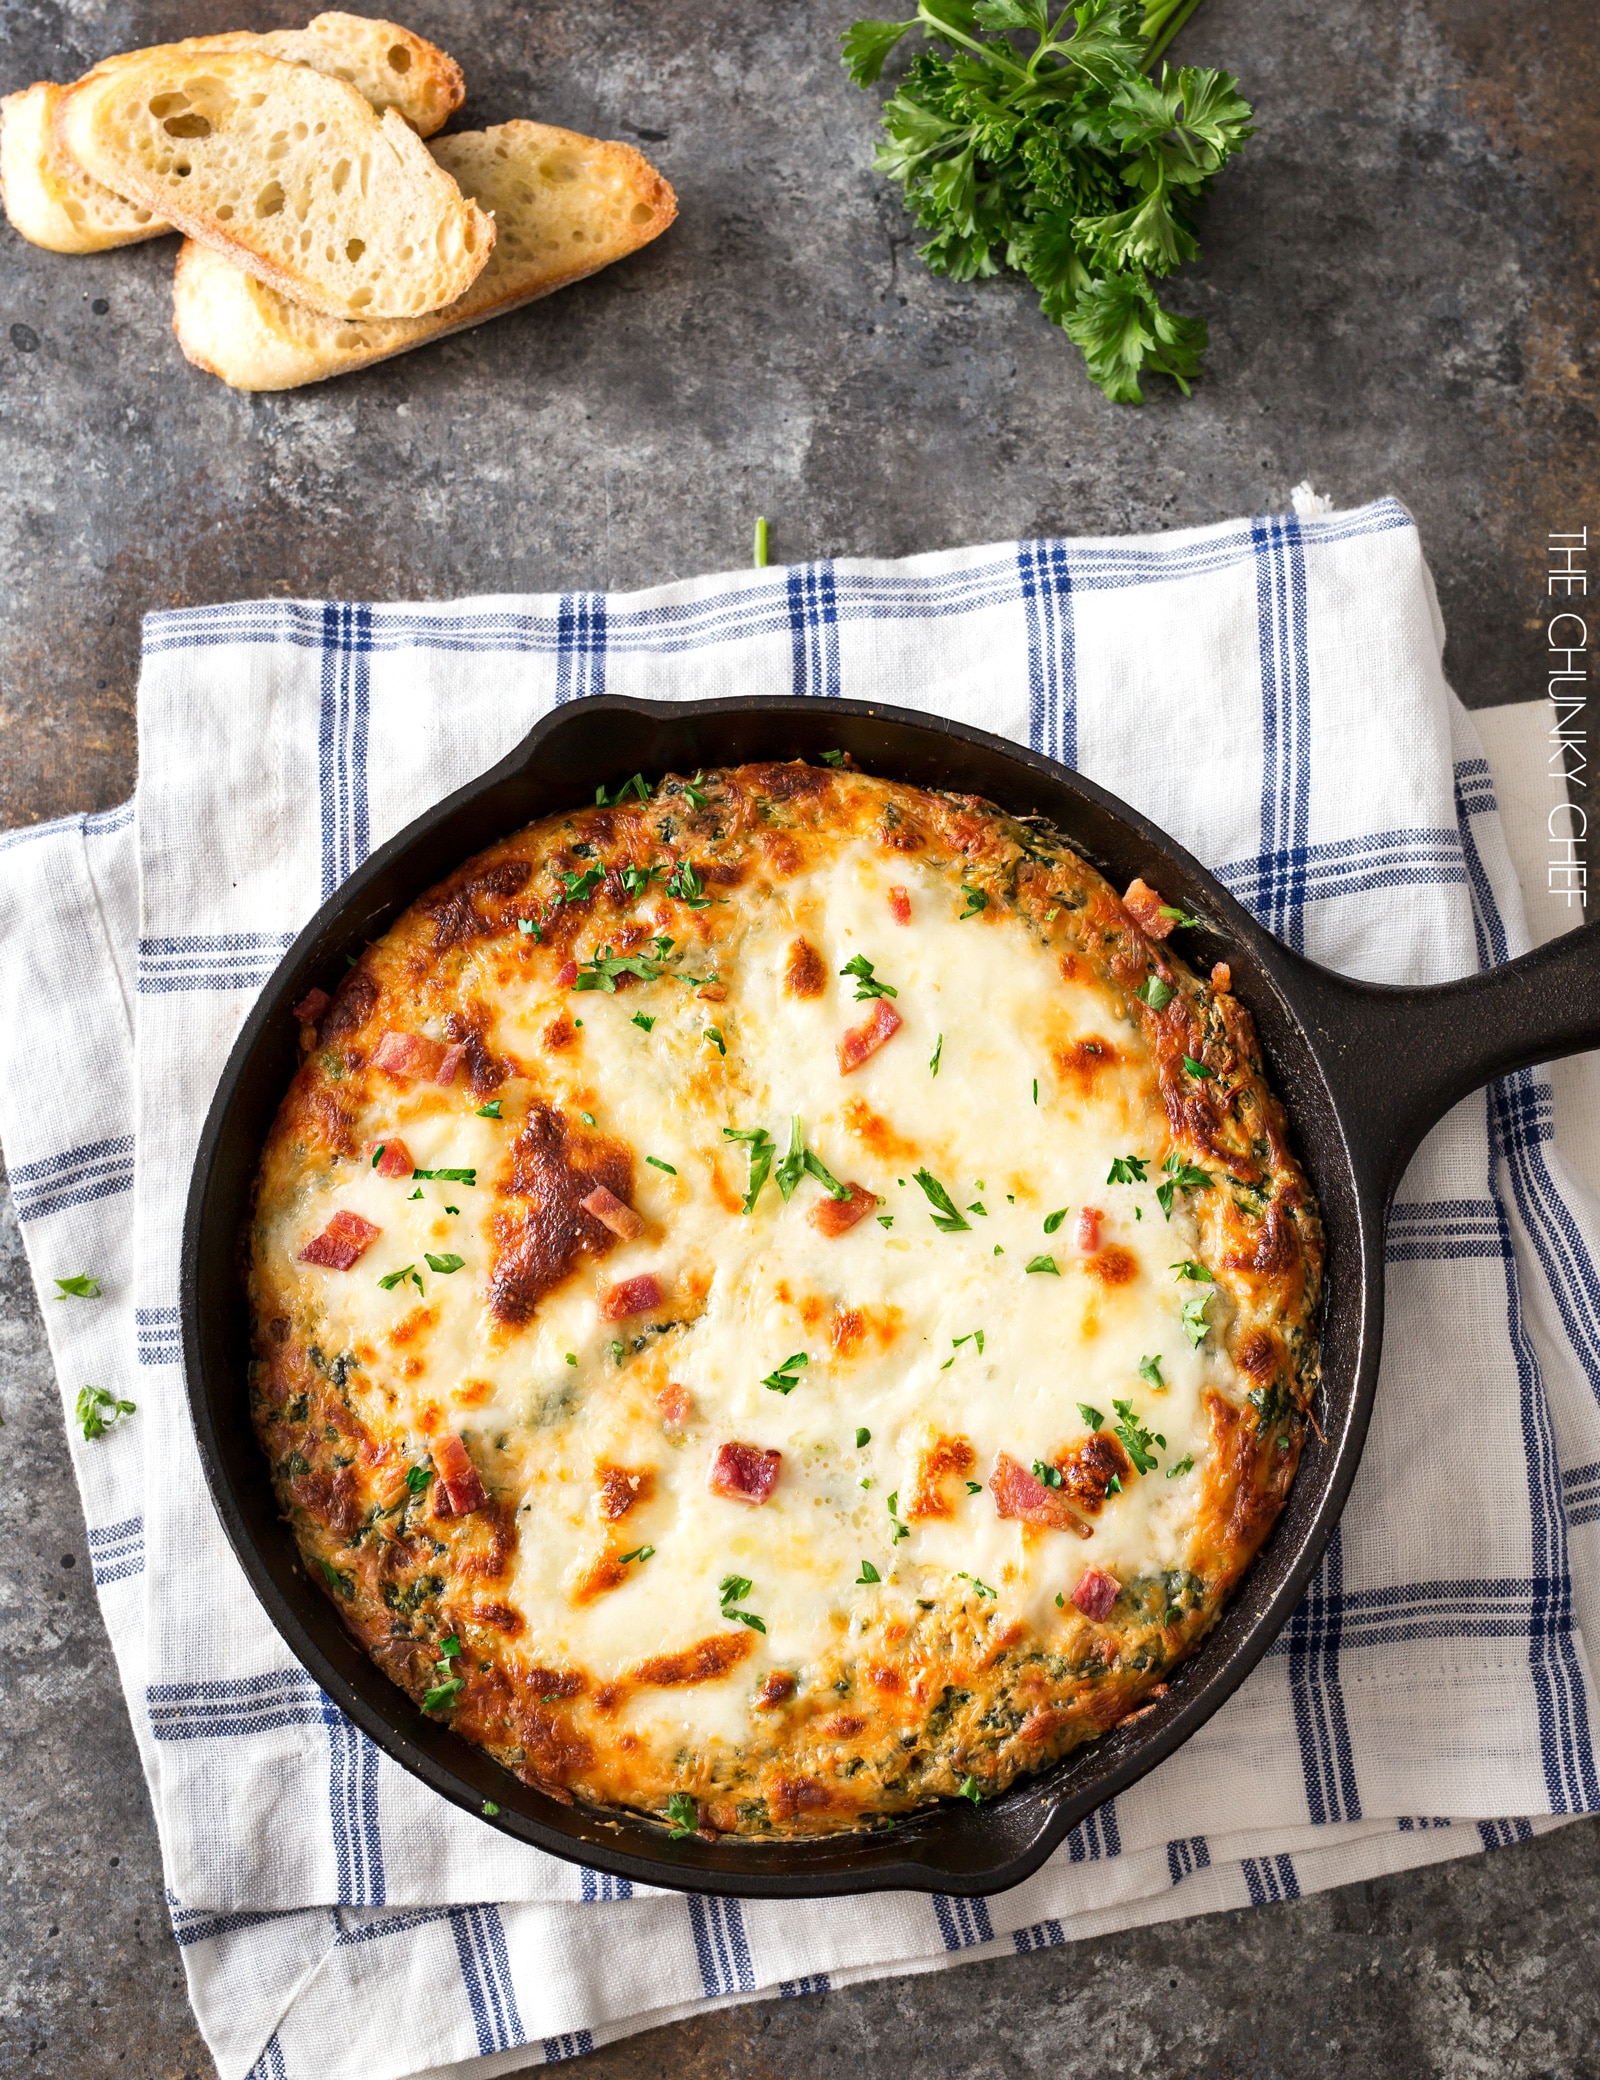 Cheesy Bacon Spinach Dip | This party spinach dip is loaded with tons of spinach, gooey cheese, crispy bacon and other mouthwatering flavors. Combine, bake, and eat! Perfect for a party! | http://thechunkychef.com